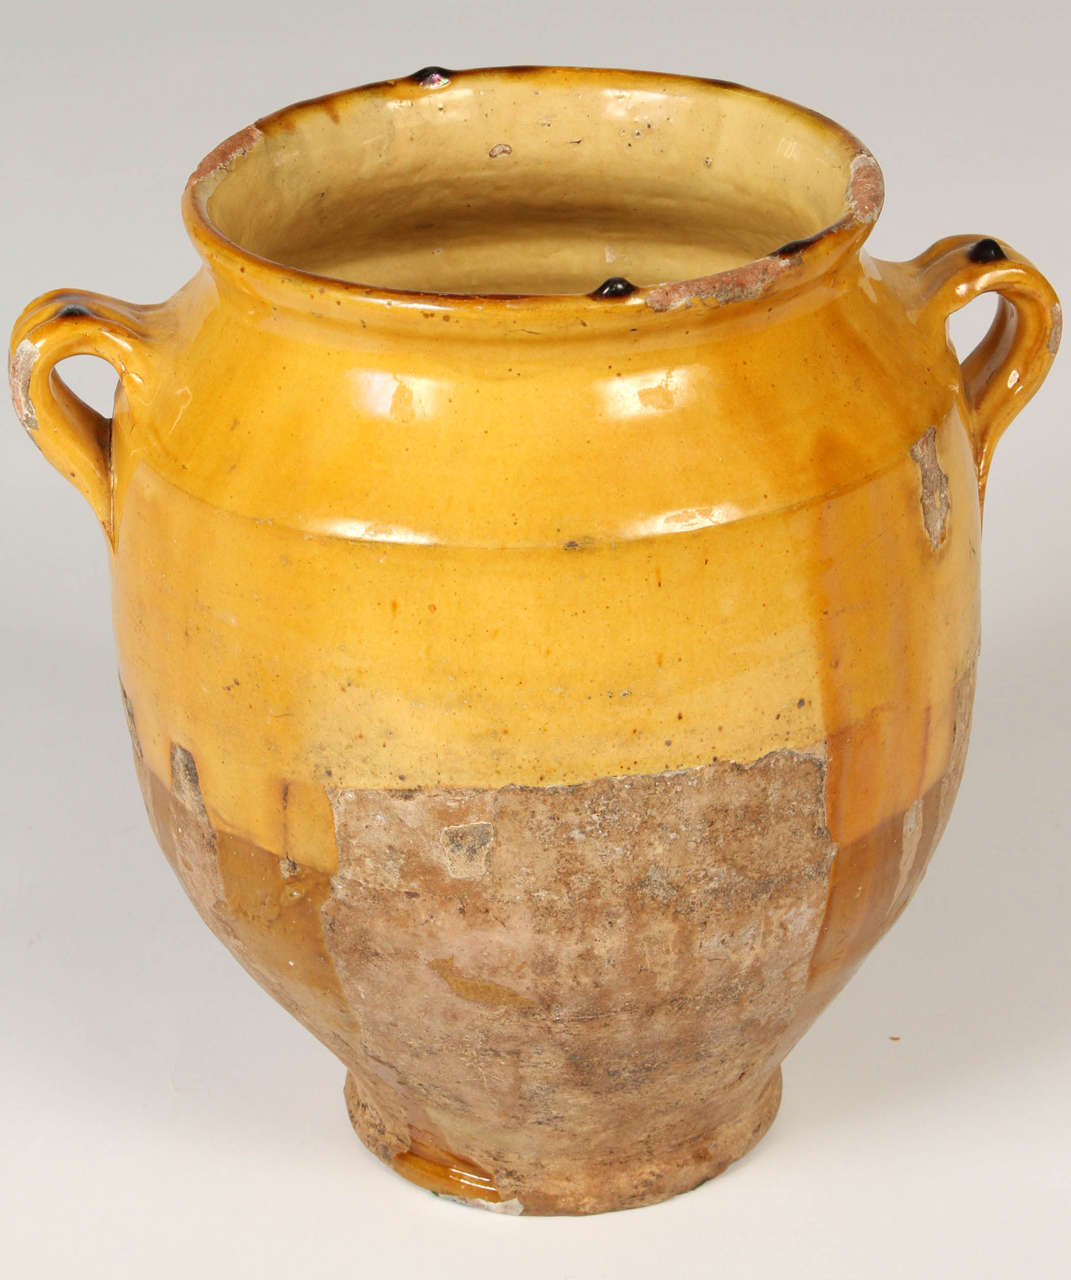 19th Century confit pot with colourful glaze in ochre on the top half and unglazed on the bottom. Earthy weathered patina. Nice as a decorative piece for use indoors or in a garden or on a terrace. Large enough for use as a planter for a small